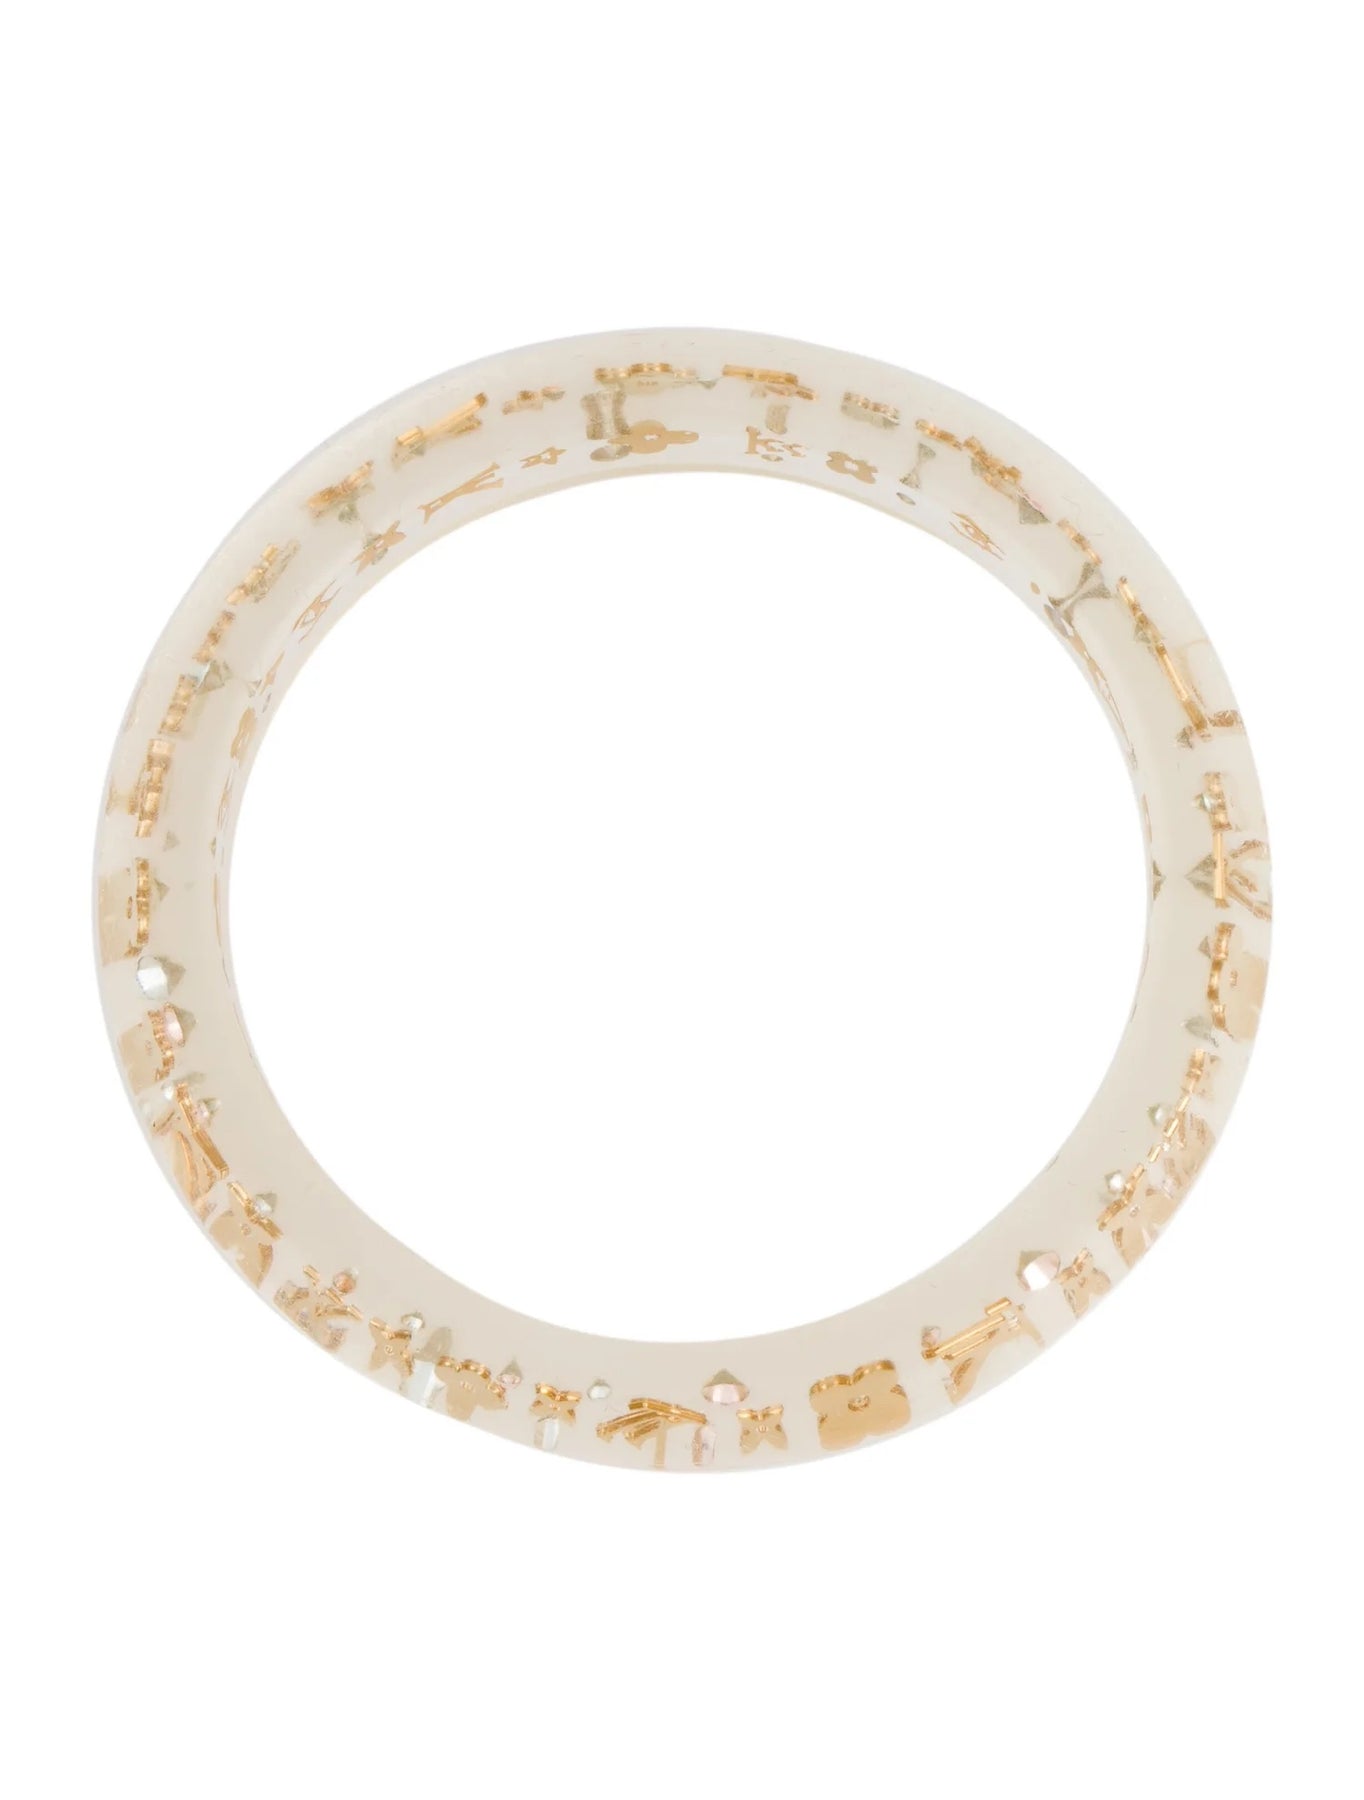 Louis Vuitton Narrow Inclusion Bangle (Clear/Gold/Red) - ShopStyle